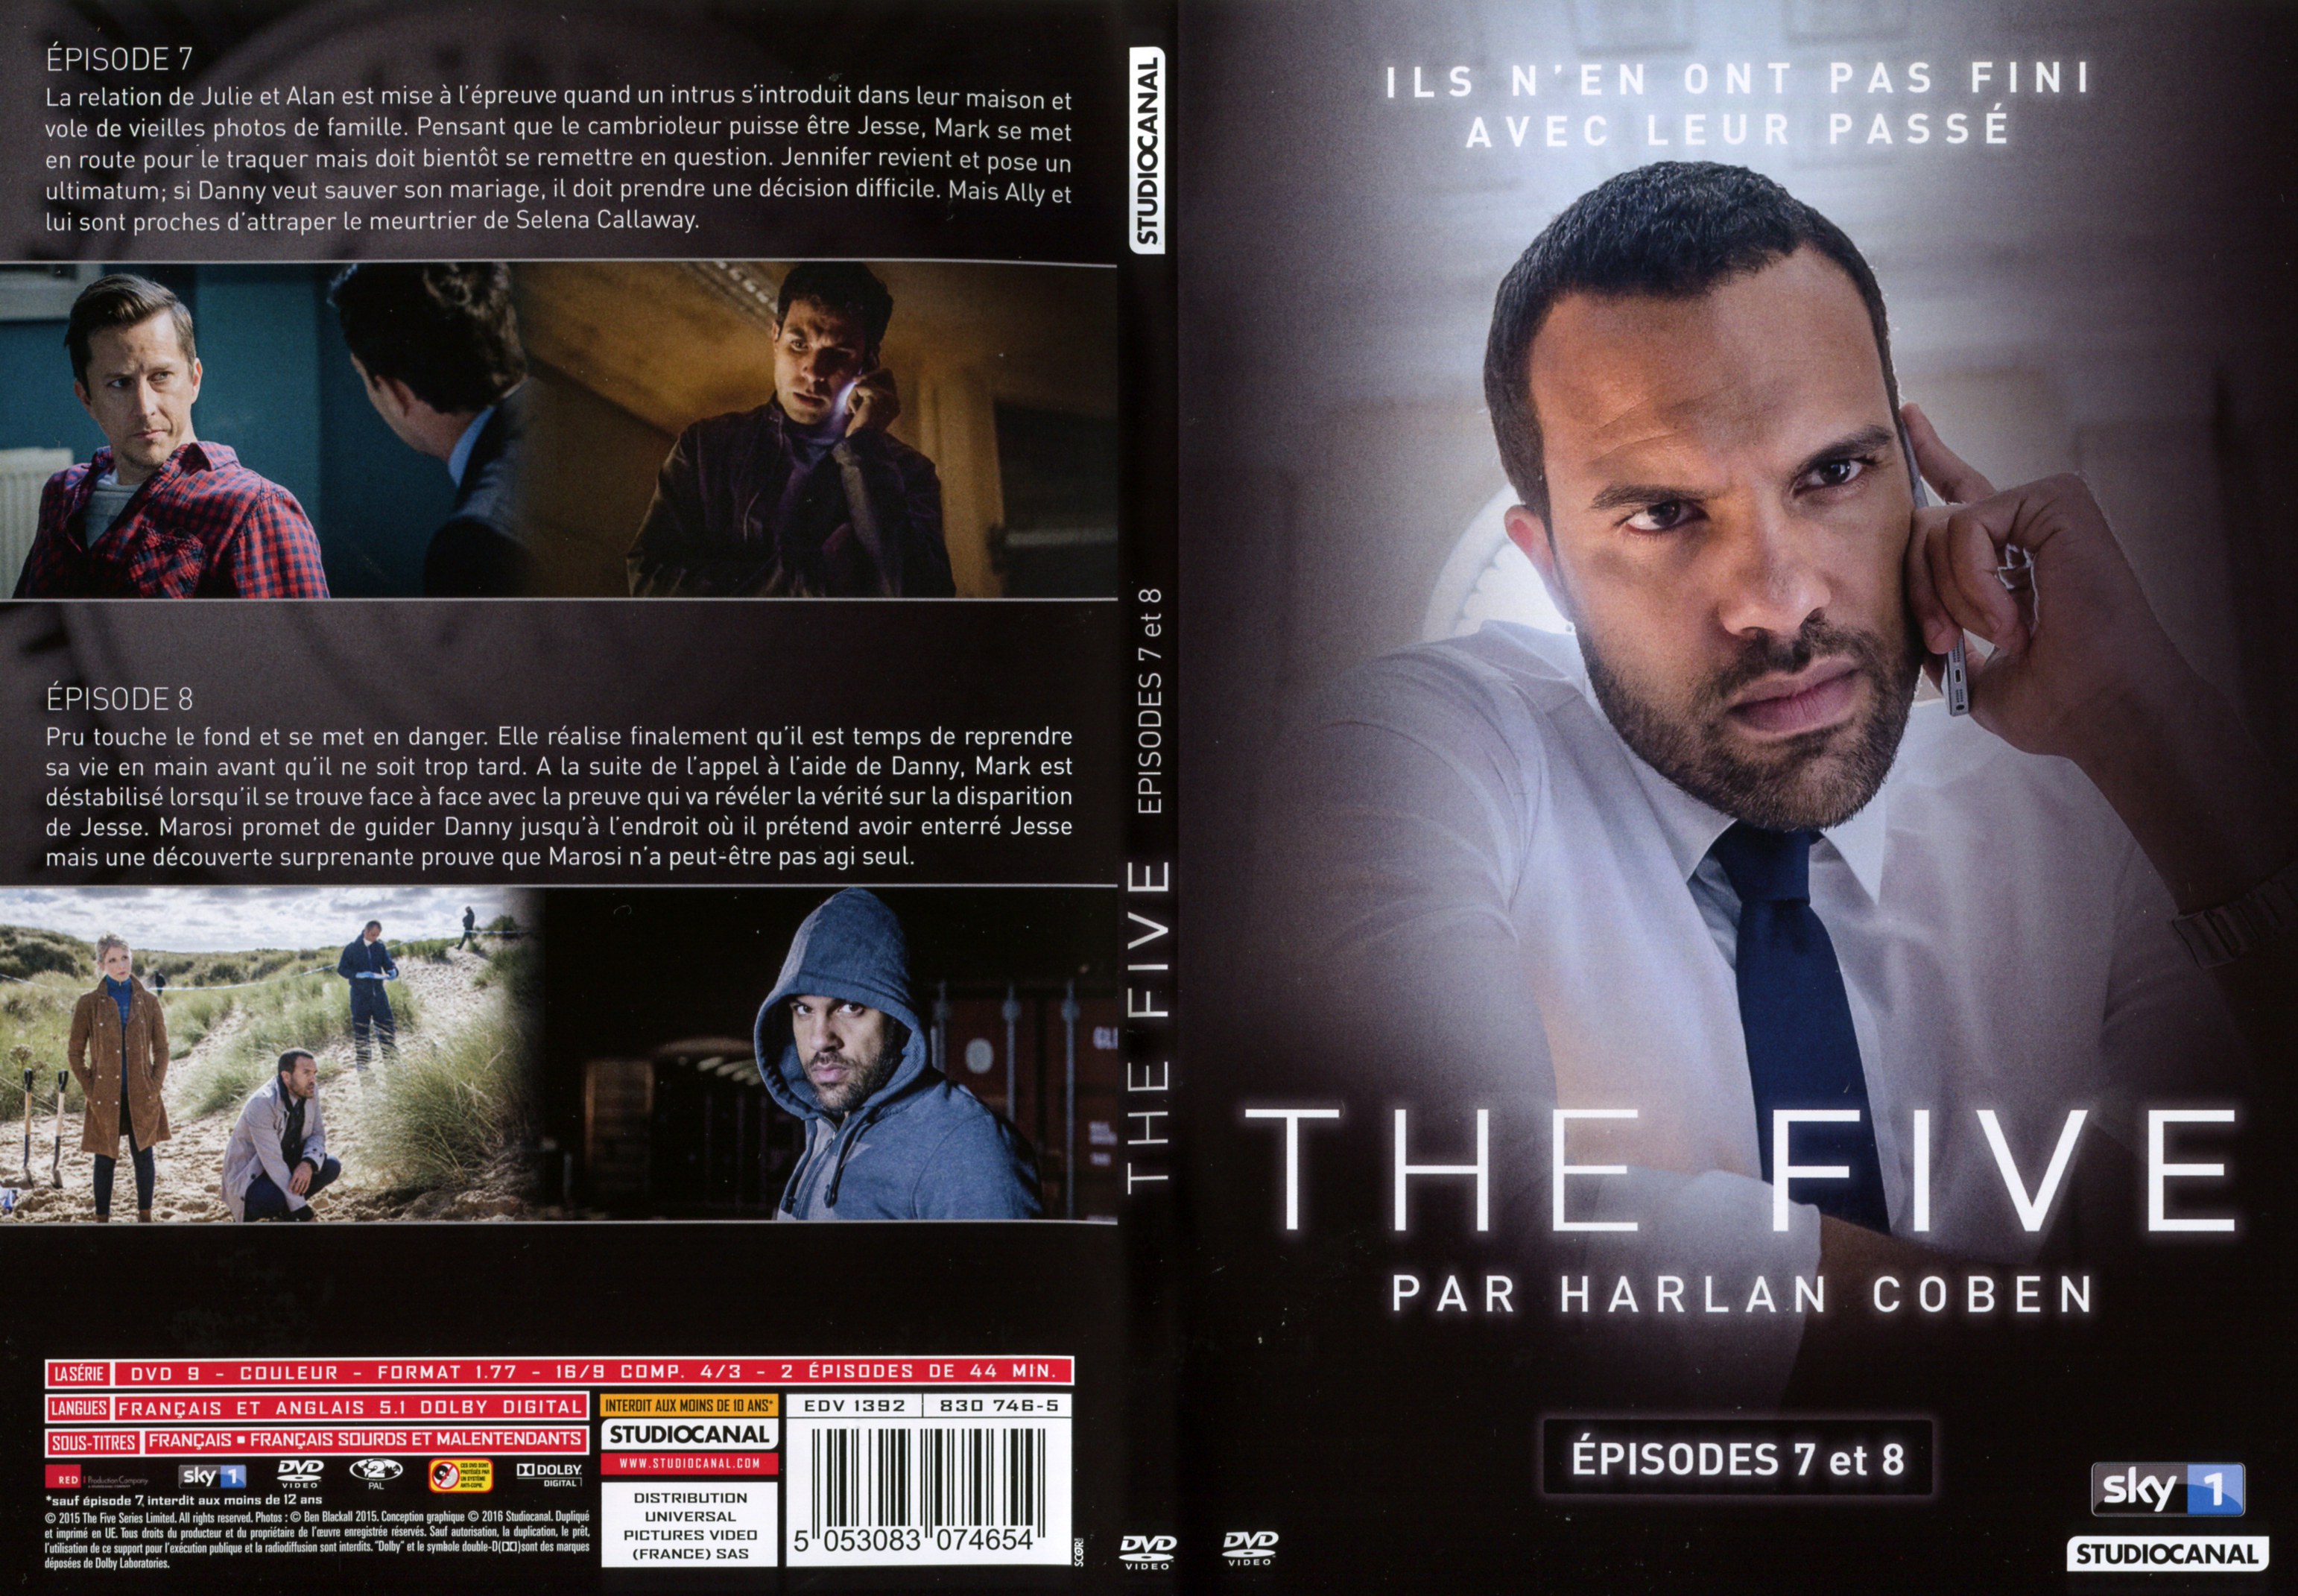 Jaquette DVD The five ep 7-8